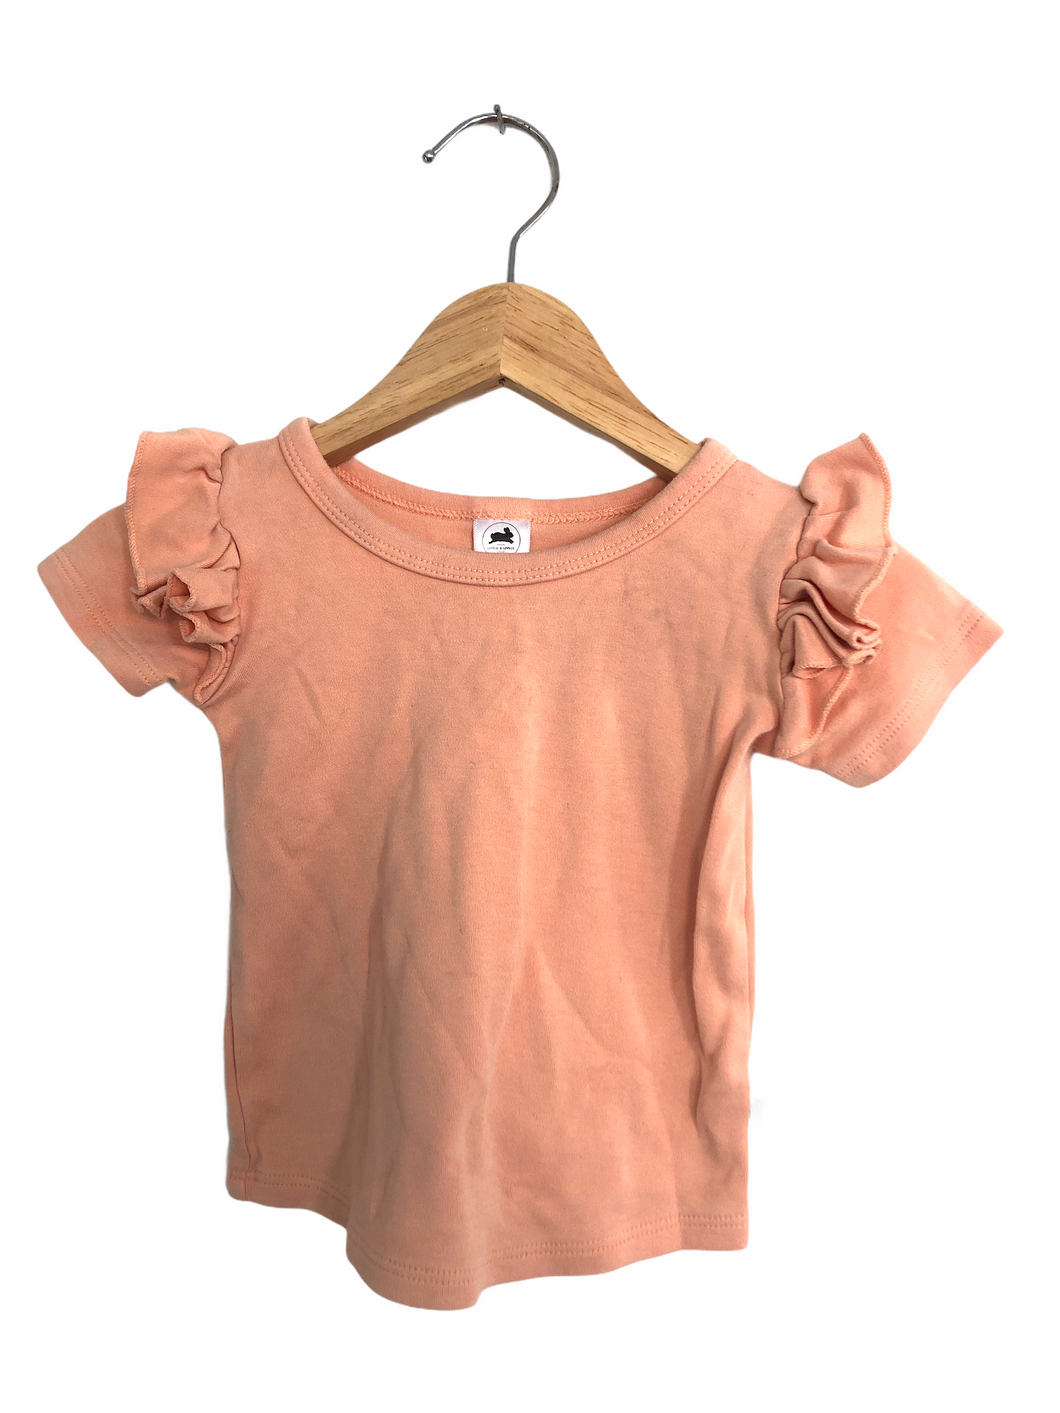 Peach Tee, 0-6 months // Little & Lively